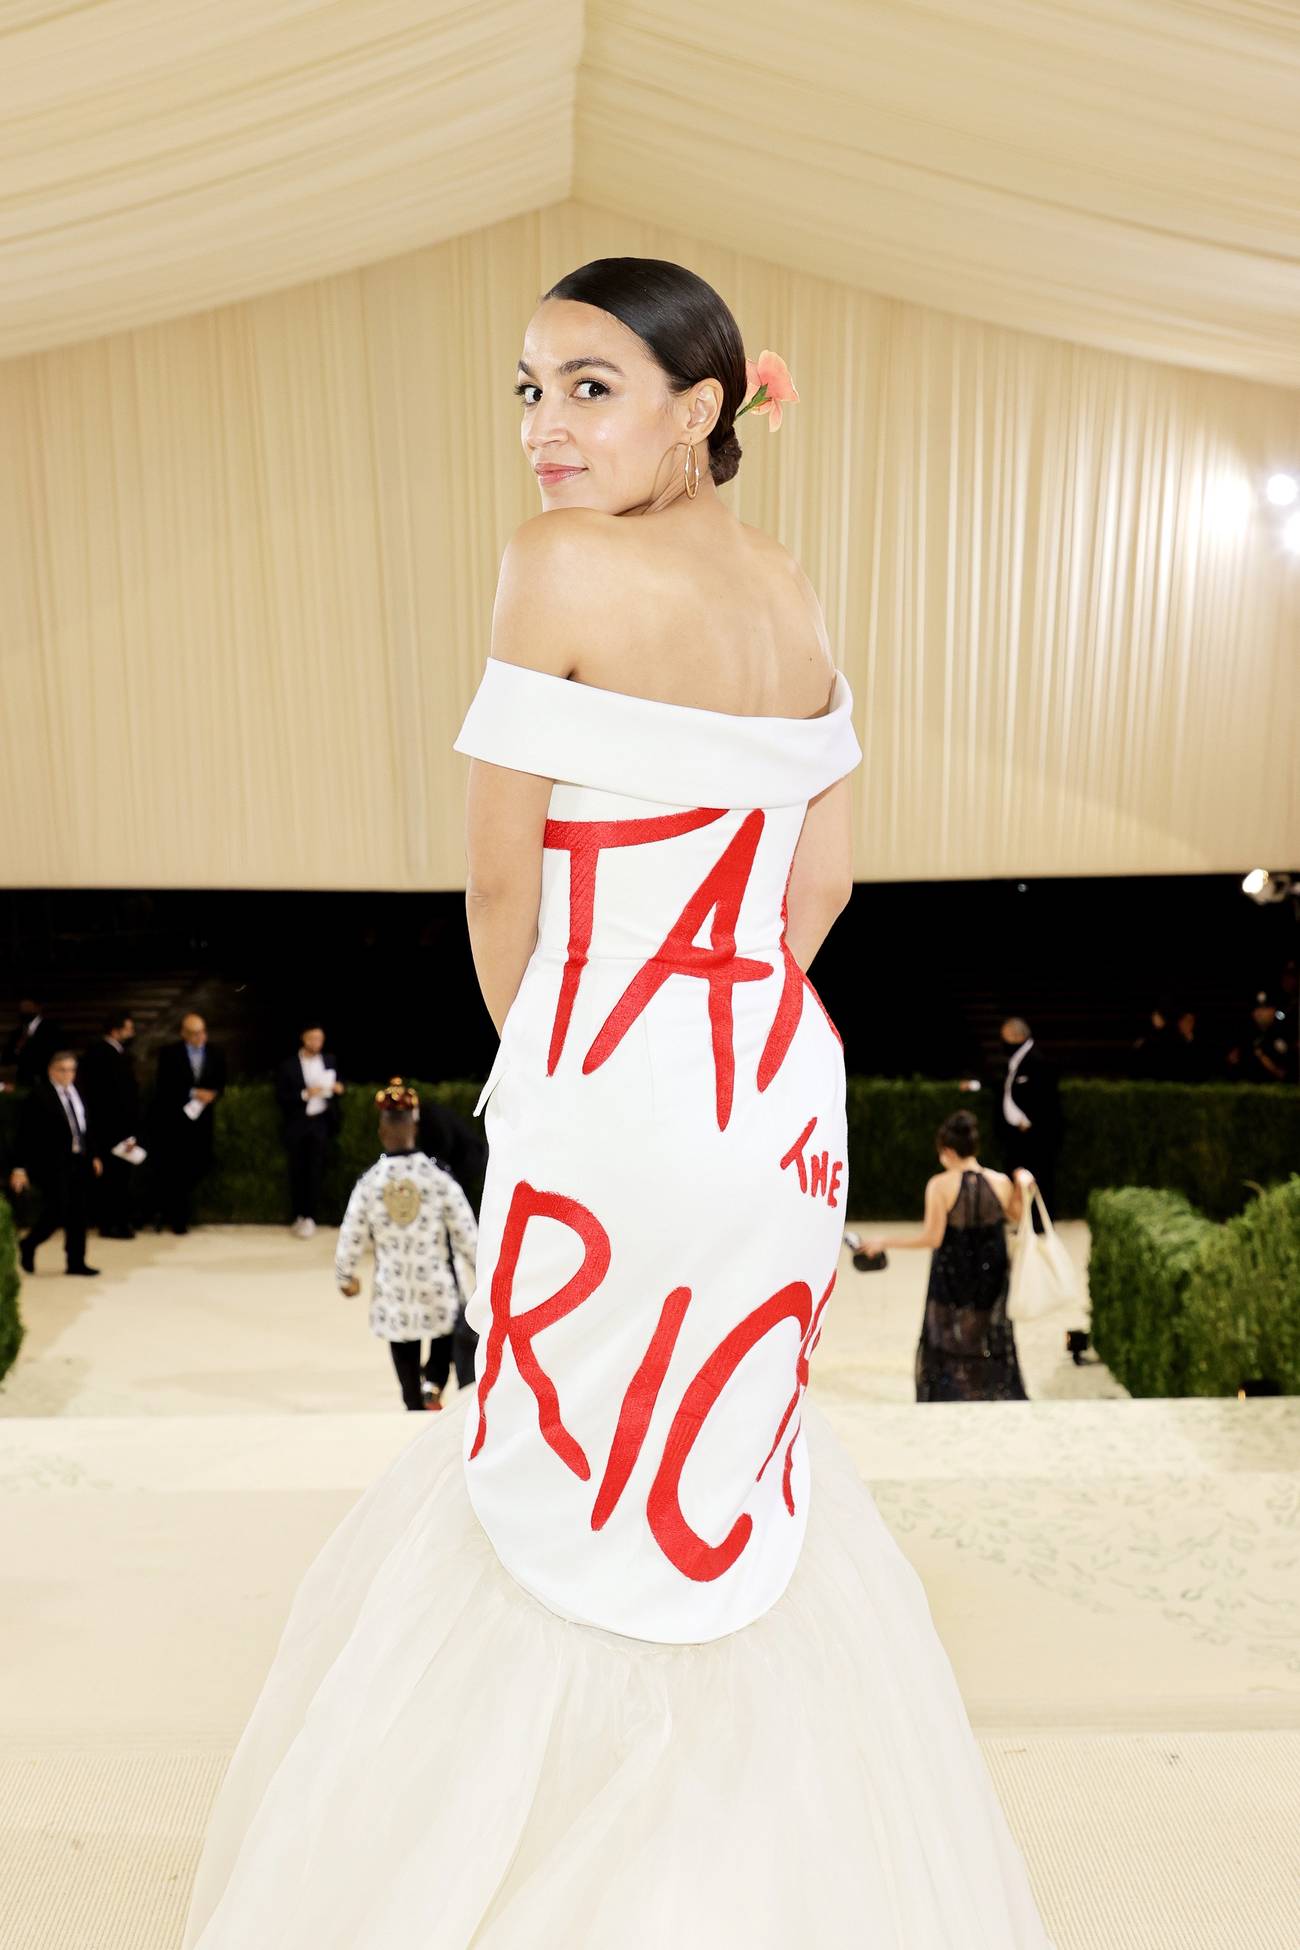 Jamie McCarthy/MG21/Getty Images for The Met Museum/Vogue